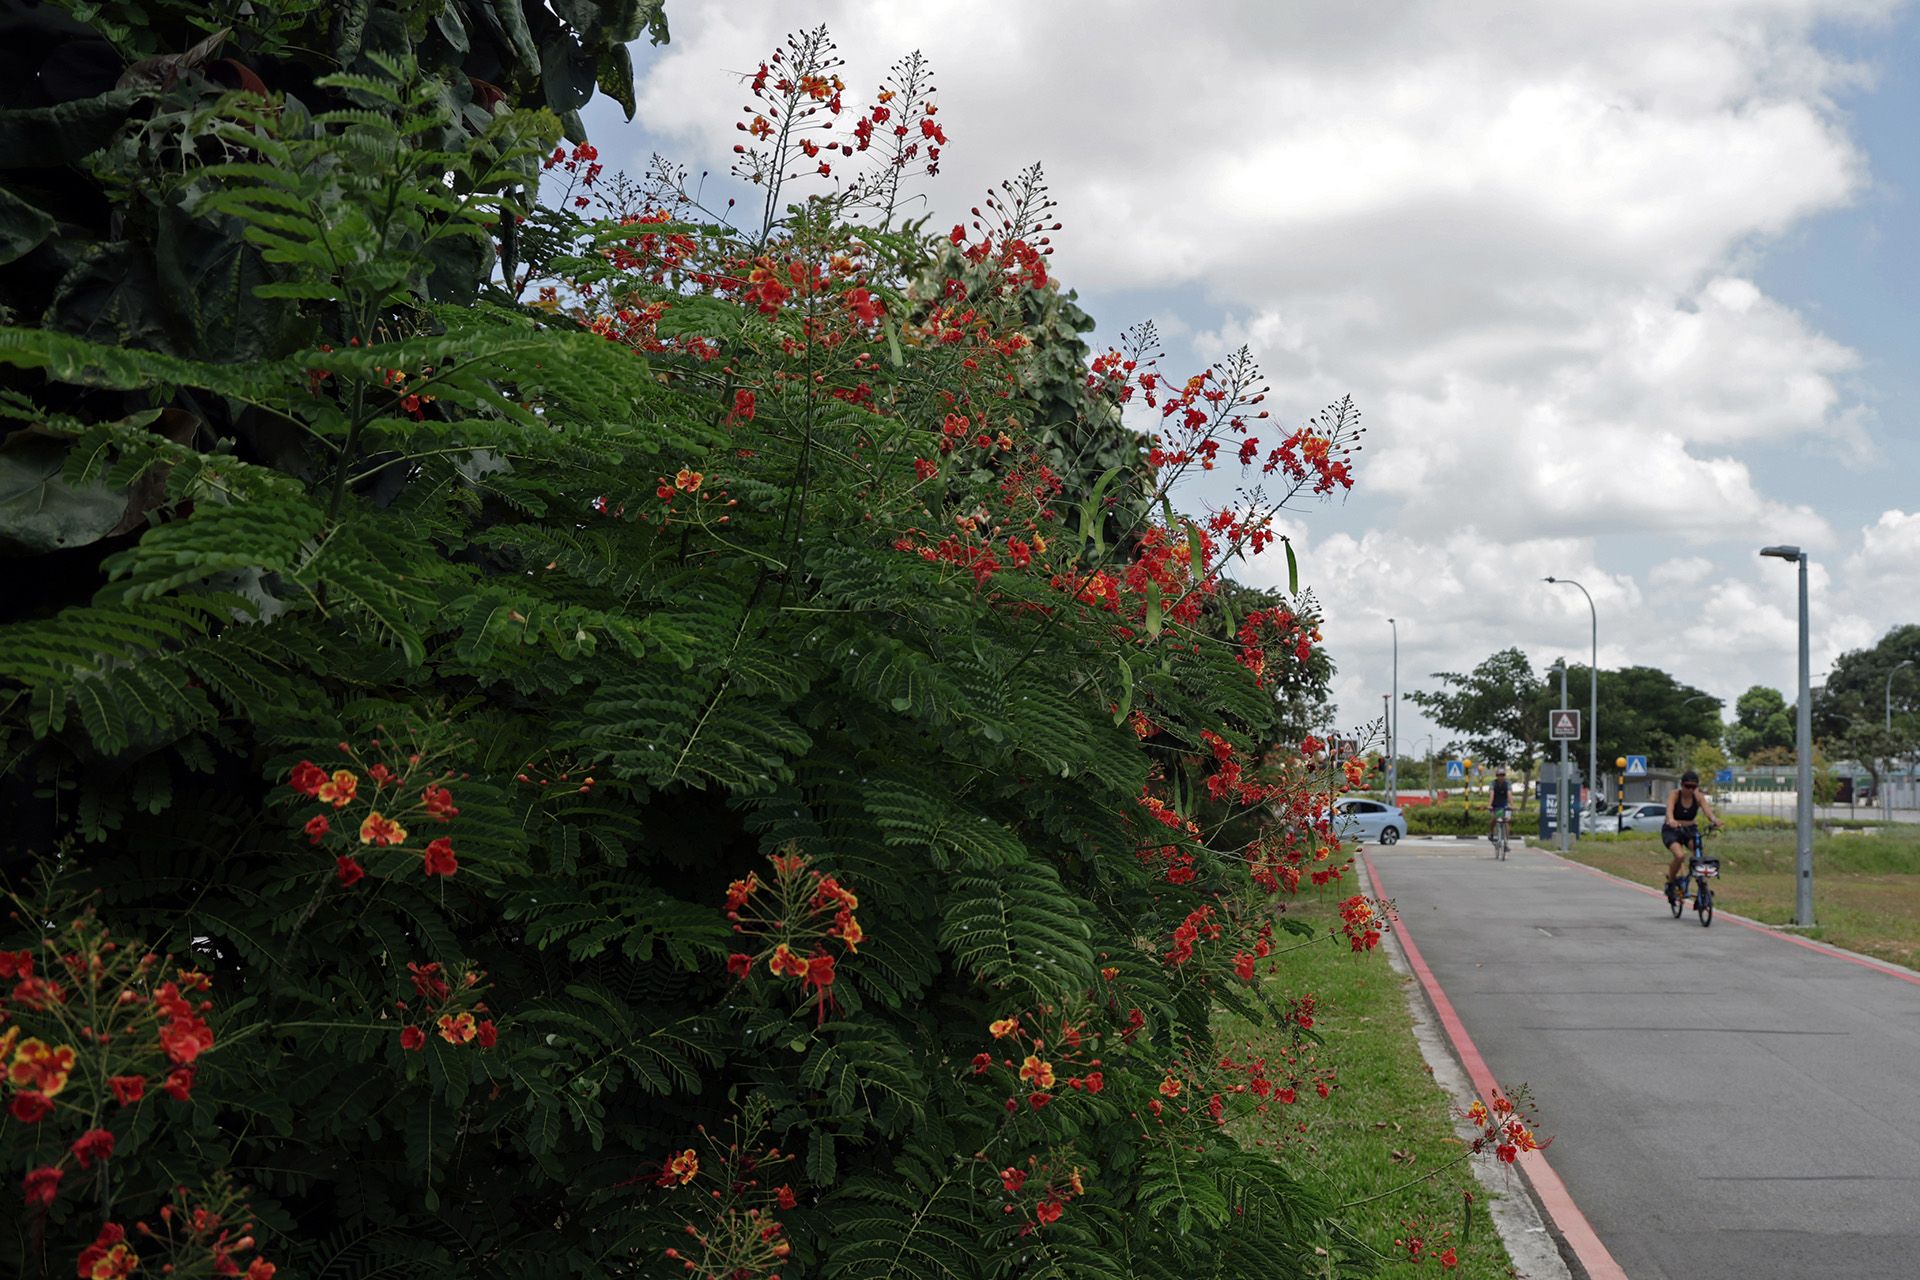 Peacock flowers blooming along Tanah Merah Coast Road on March 1. ST PHOTO: NEO XIAOBIN